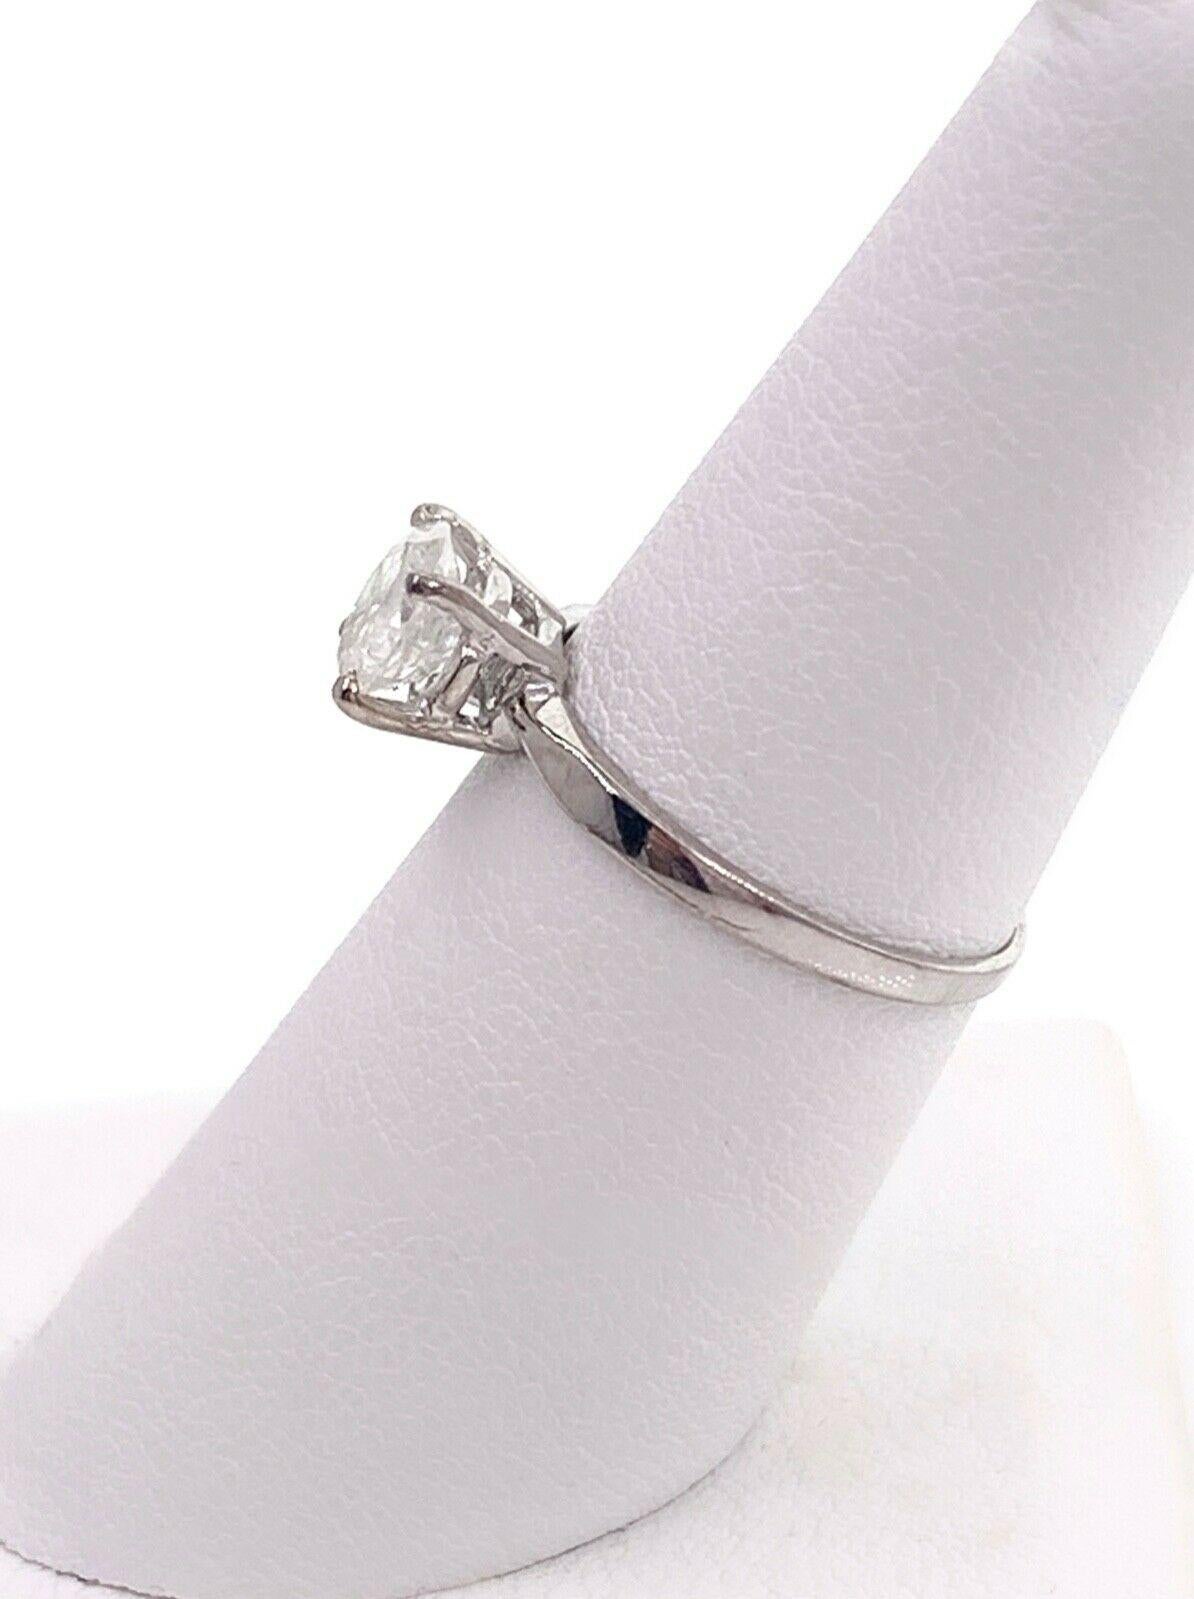 1.01 Carat Round Brilliant Diamond Salt and Pepper Solitaire Engagement Ring In New Condition For Sale In San Diego, CA